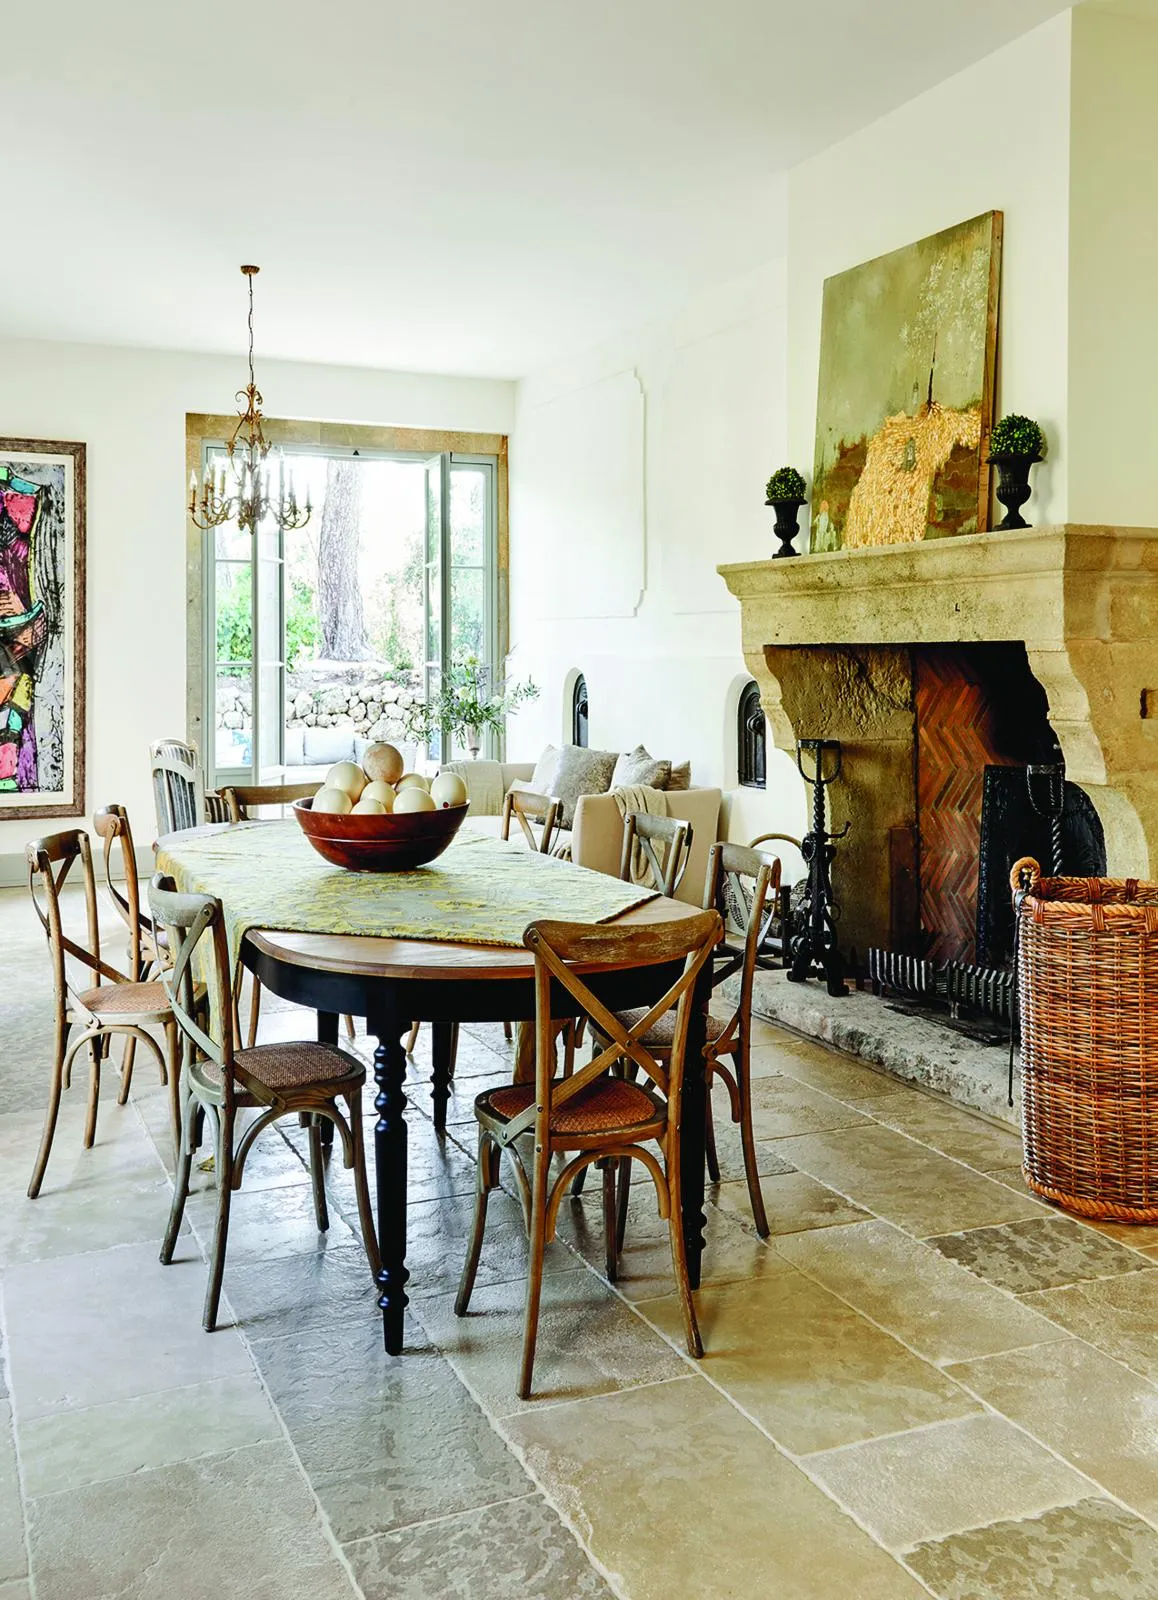 A renovated ancient French farmhouse